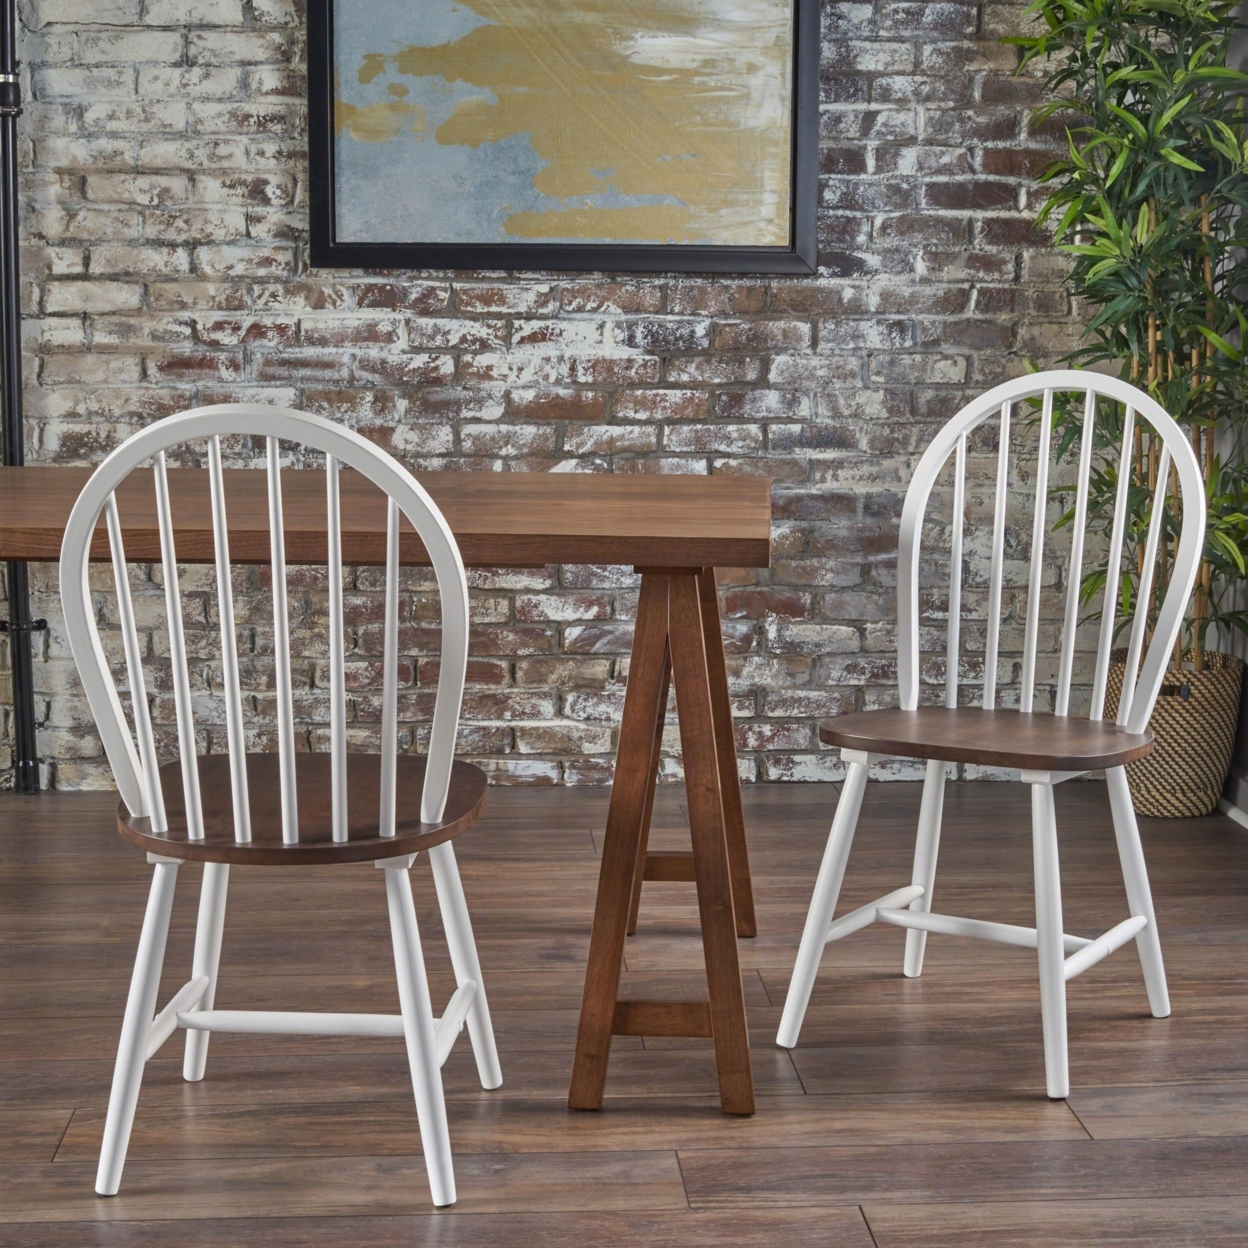 Crosby Farmhouse Cottage High Back Spindled Rubberwood Dining Chairs (Set Of 2) - Brown/White